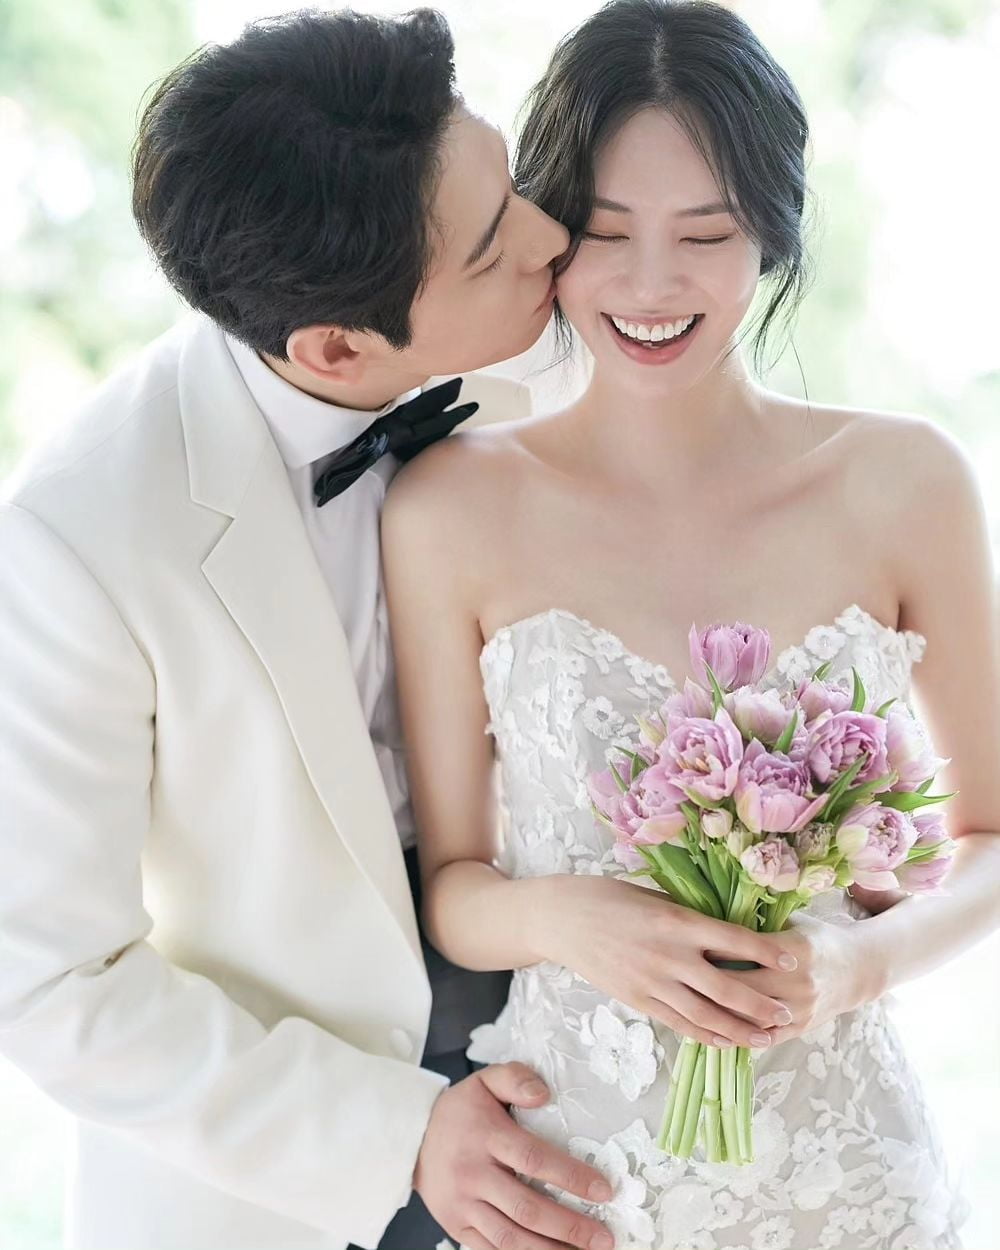 Kim Soo-bin, thoughts on marriage to Yoon Park, "I will not forget my gratitude and live well"